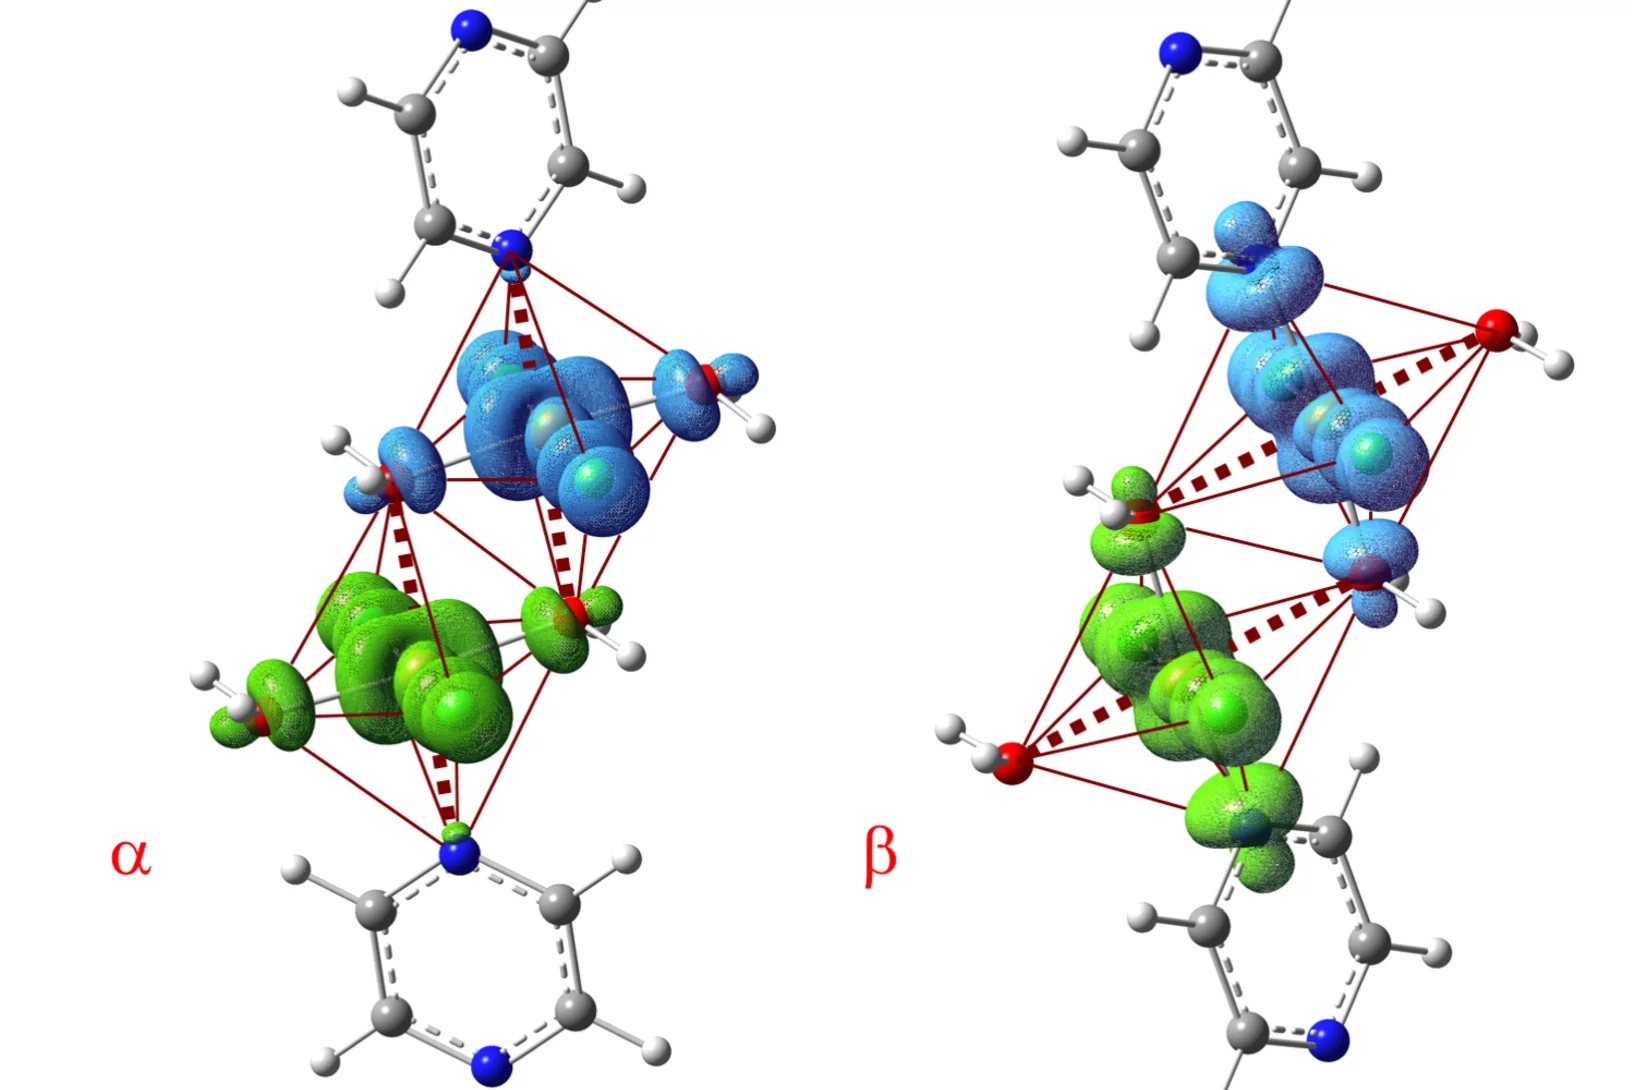 Crystallographic structure of [CuF2(H2O)2]2pyrazine below (left) and above the structural phase transition observed at 18 kbar. The images show calculated spin-density distributions of the ground state, with spins up and down represented in cyan and green, respectively. (Image adapted from [1].)